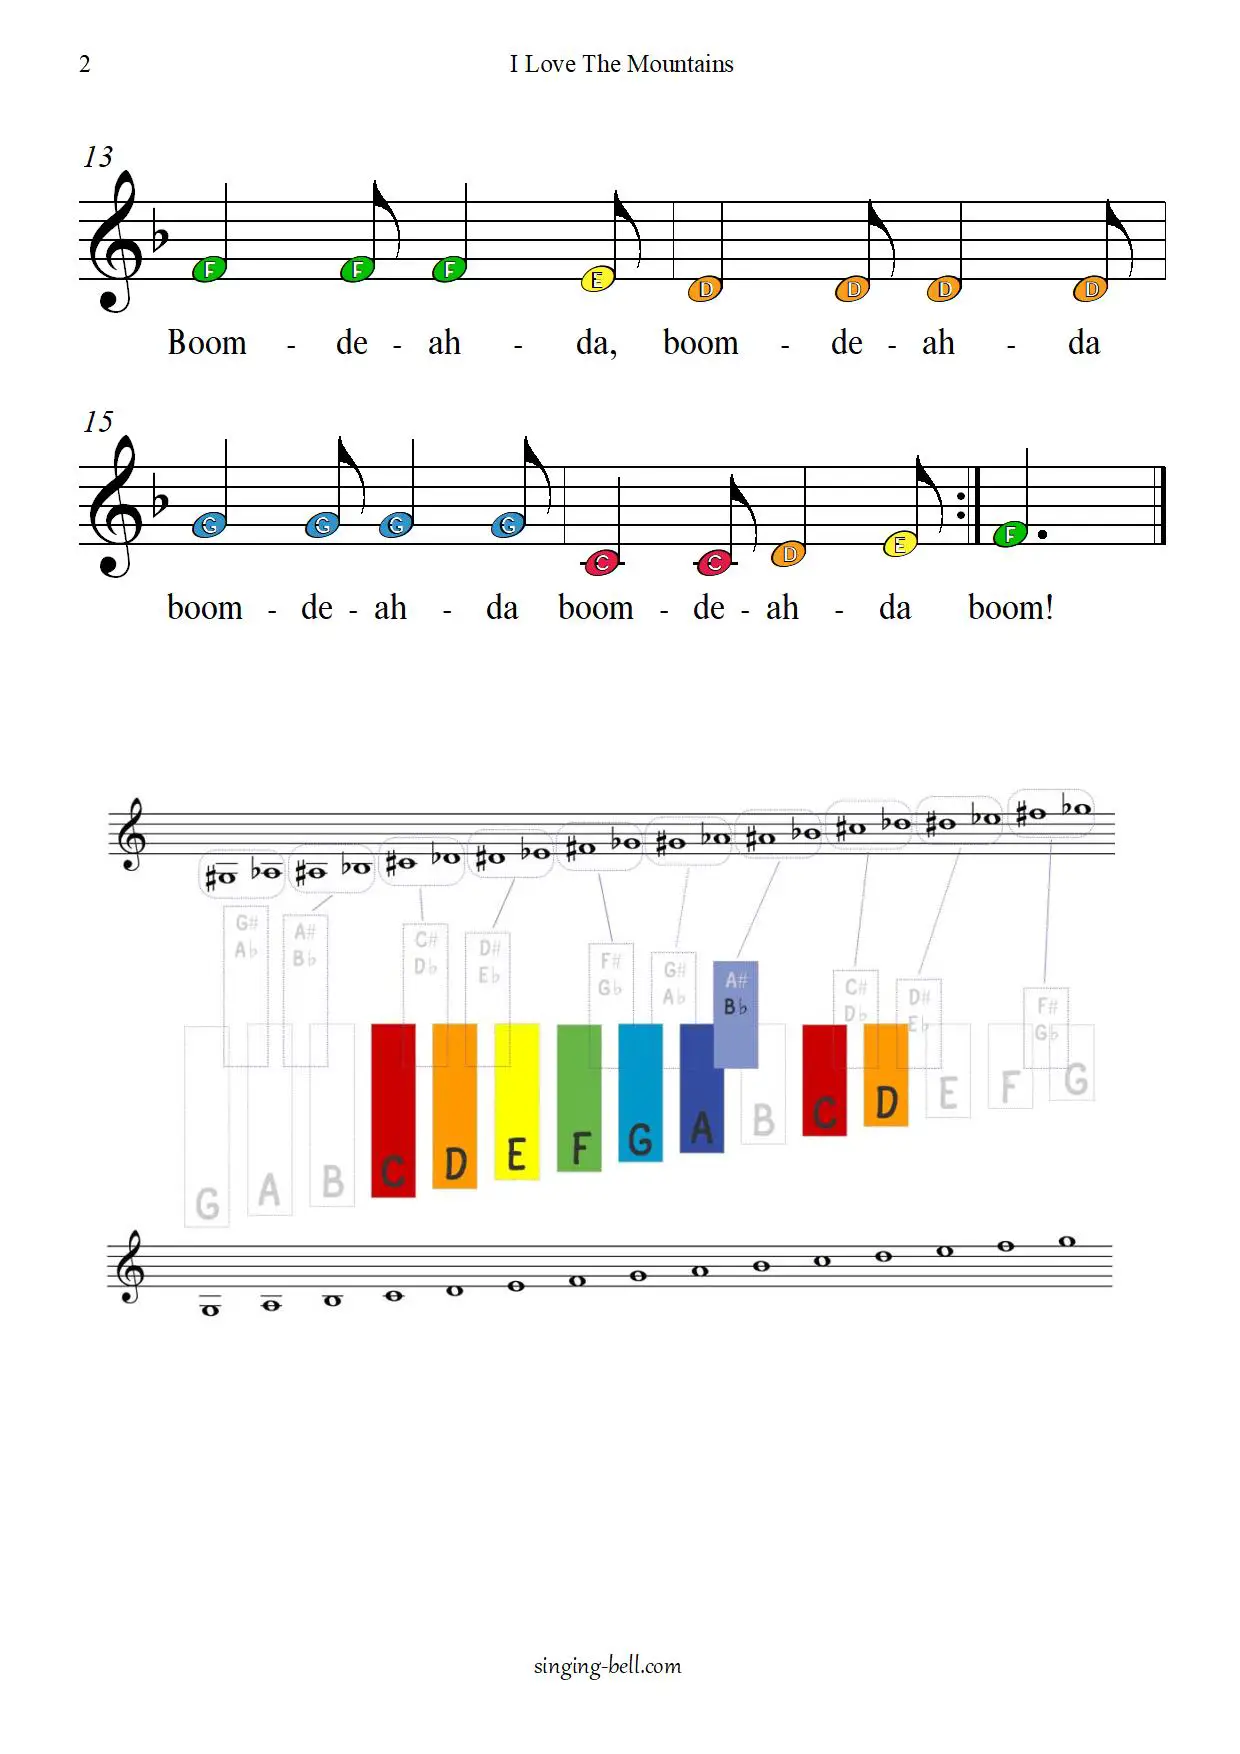 I Love The Mountains free xylophone glockenspiel sheet music color notes chart pdf page-2